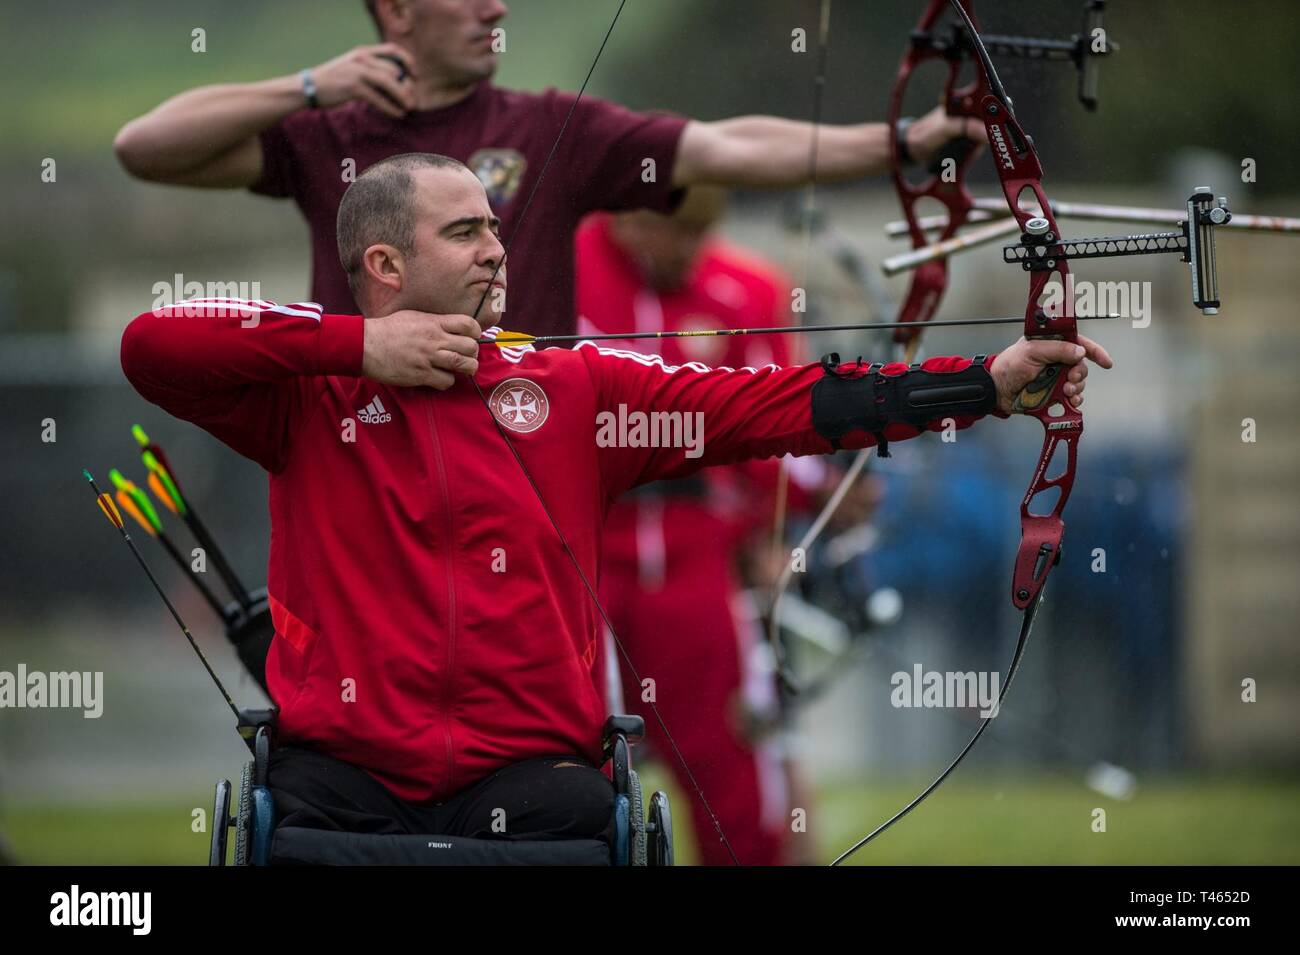 A Georgian athlete participates in the 2019 Marine Corps Trials archery competition at Marine Corps Base Camp Pendleton, California, March 2. The Marine Corps Trials promotes recovery and rehabilitation through adaptive sports participation and develops camaraderie among recovering service members and veterans. Additionally, the competition is an opportunity for participants to demonstrate physical and mental achievements and serves as the primary venue to select Marine Corps participants for the DoD Warrior Games. Stock Photo